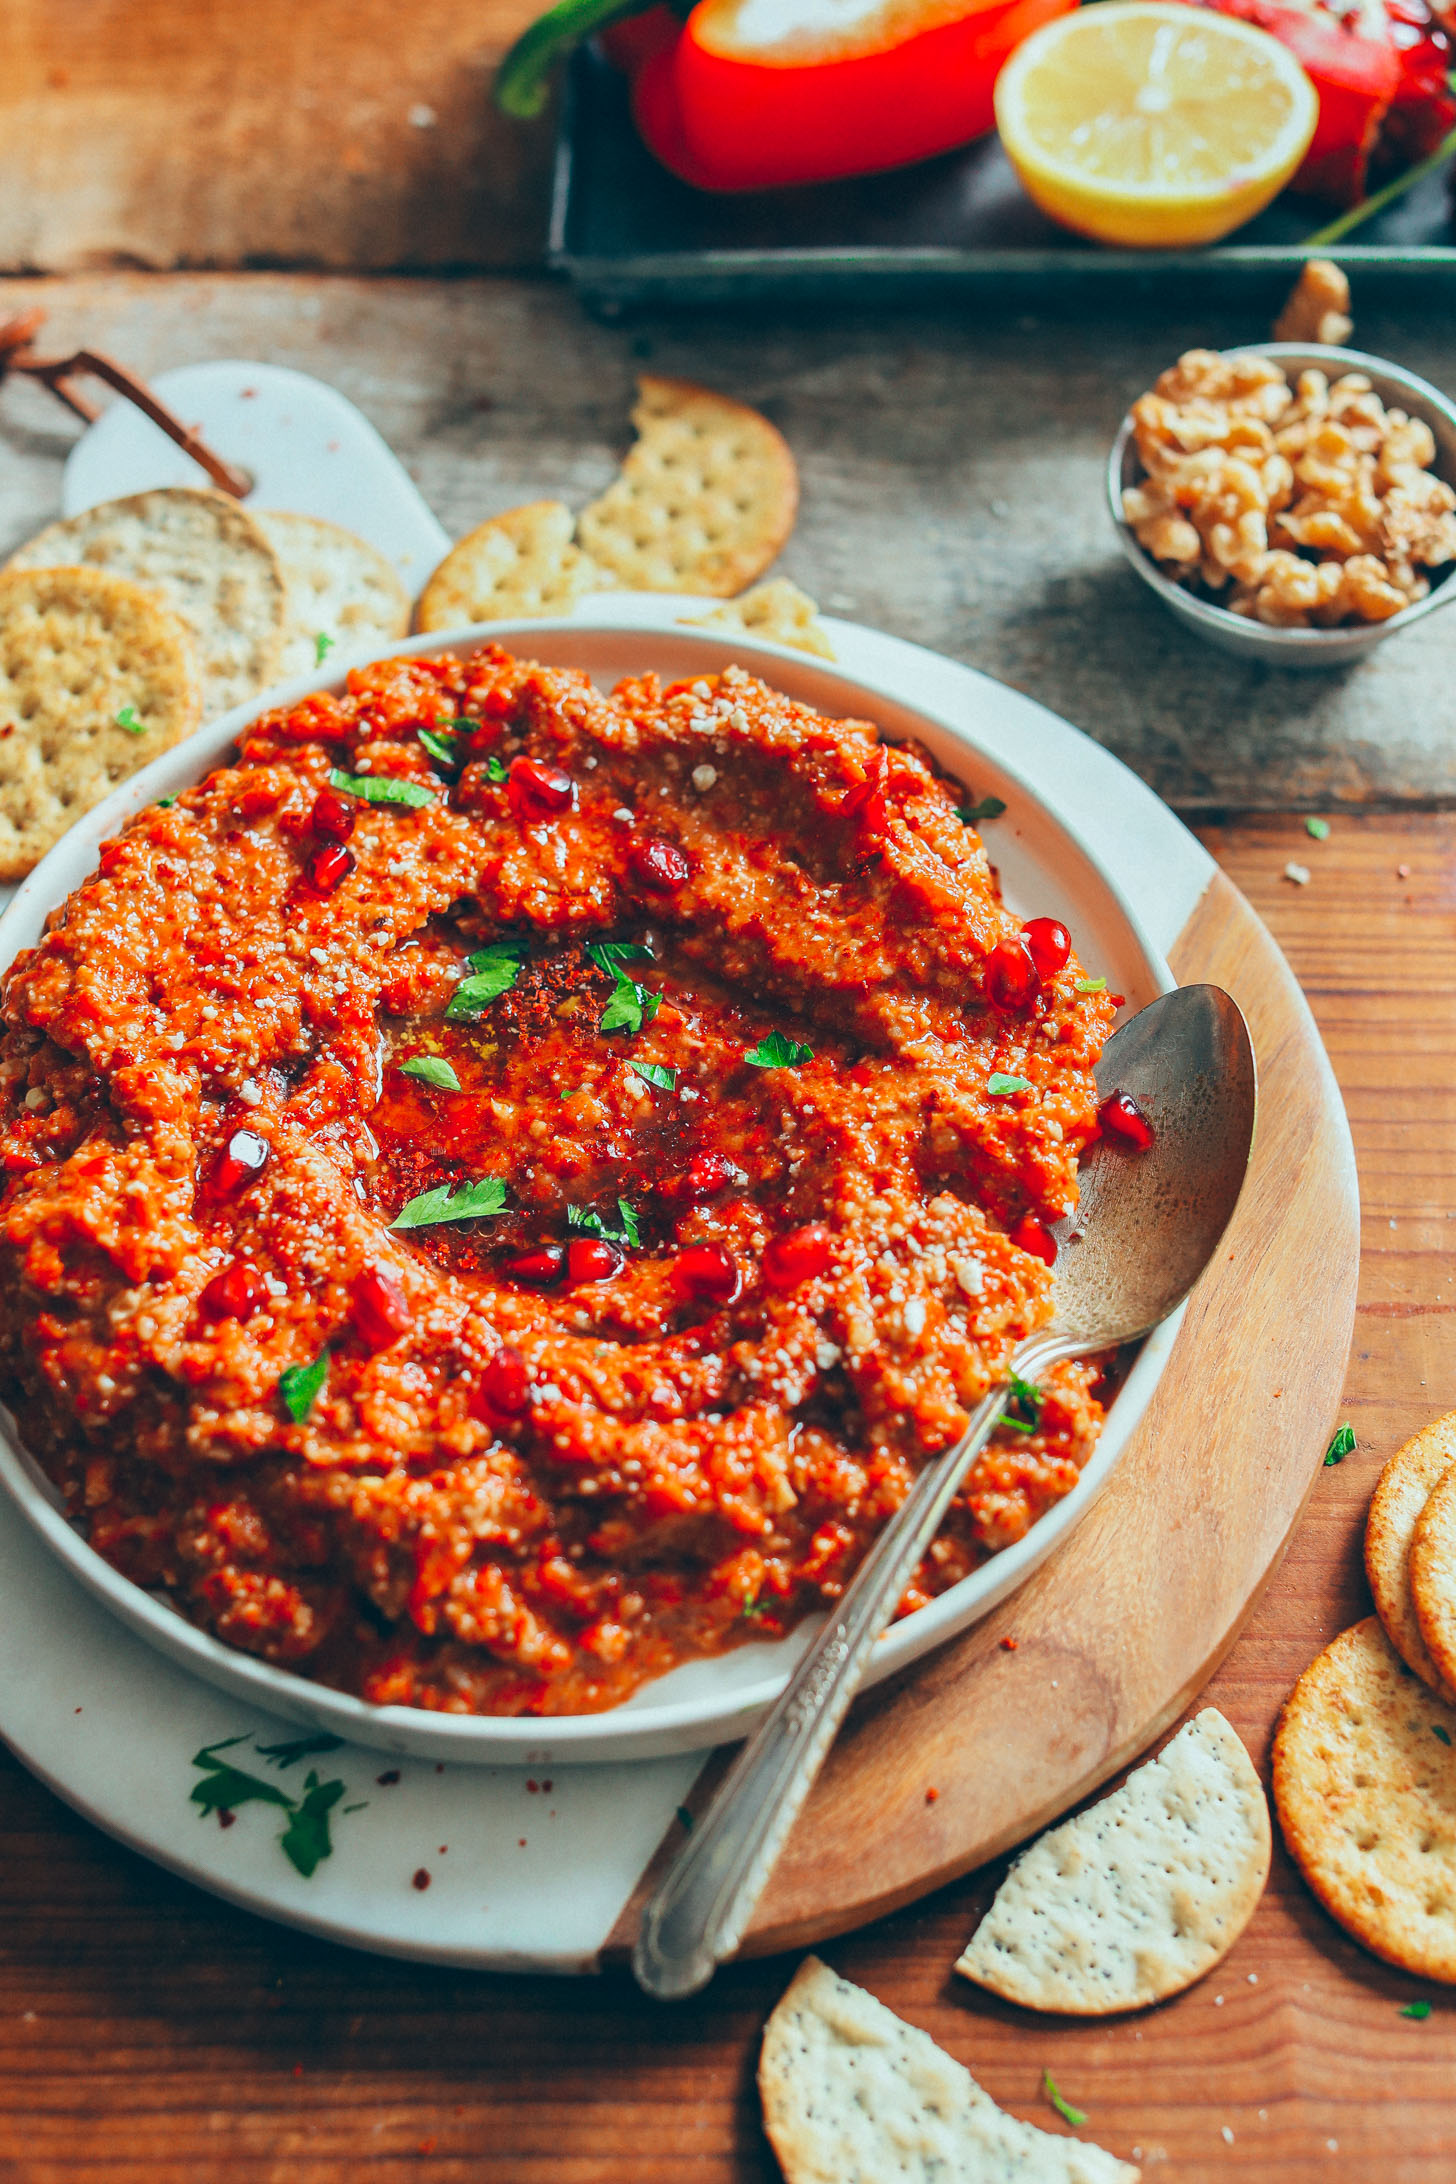 Smoky, spicy, and slightly sweet Gluten-Free Muhamarra Dip with gluten-free crackers